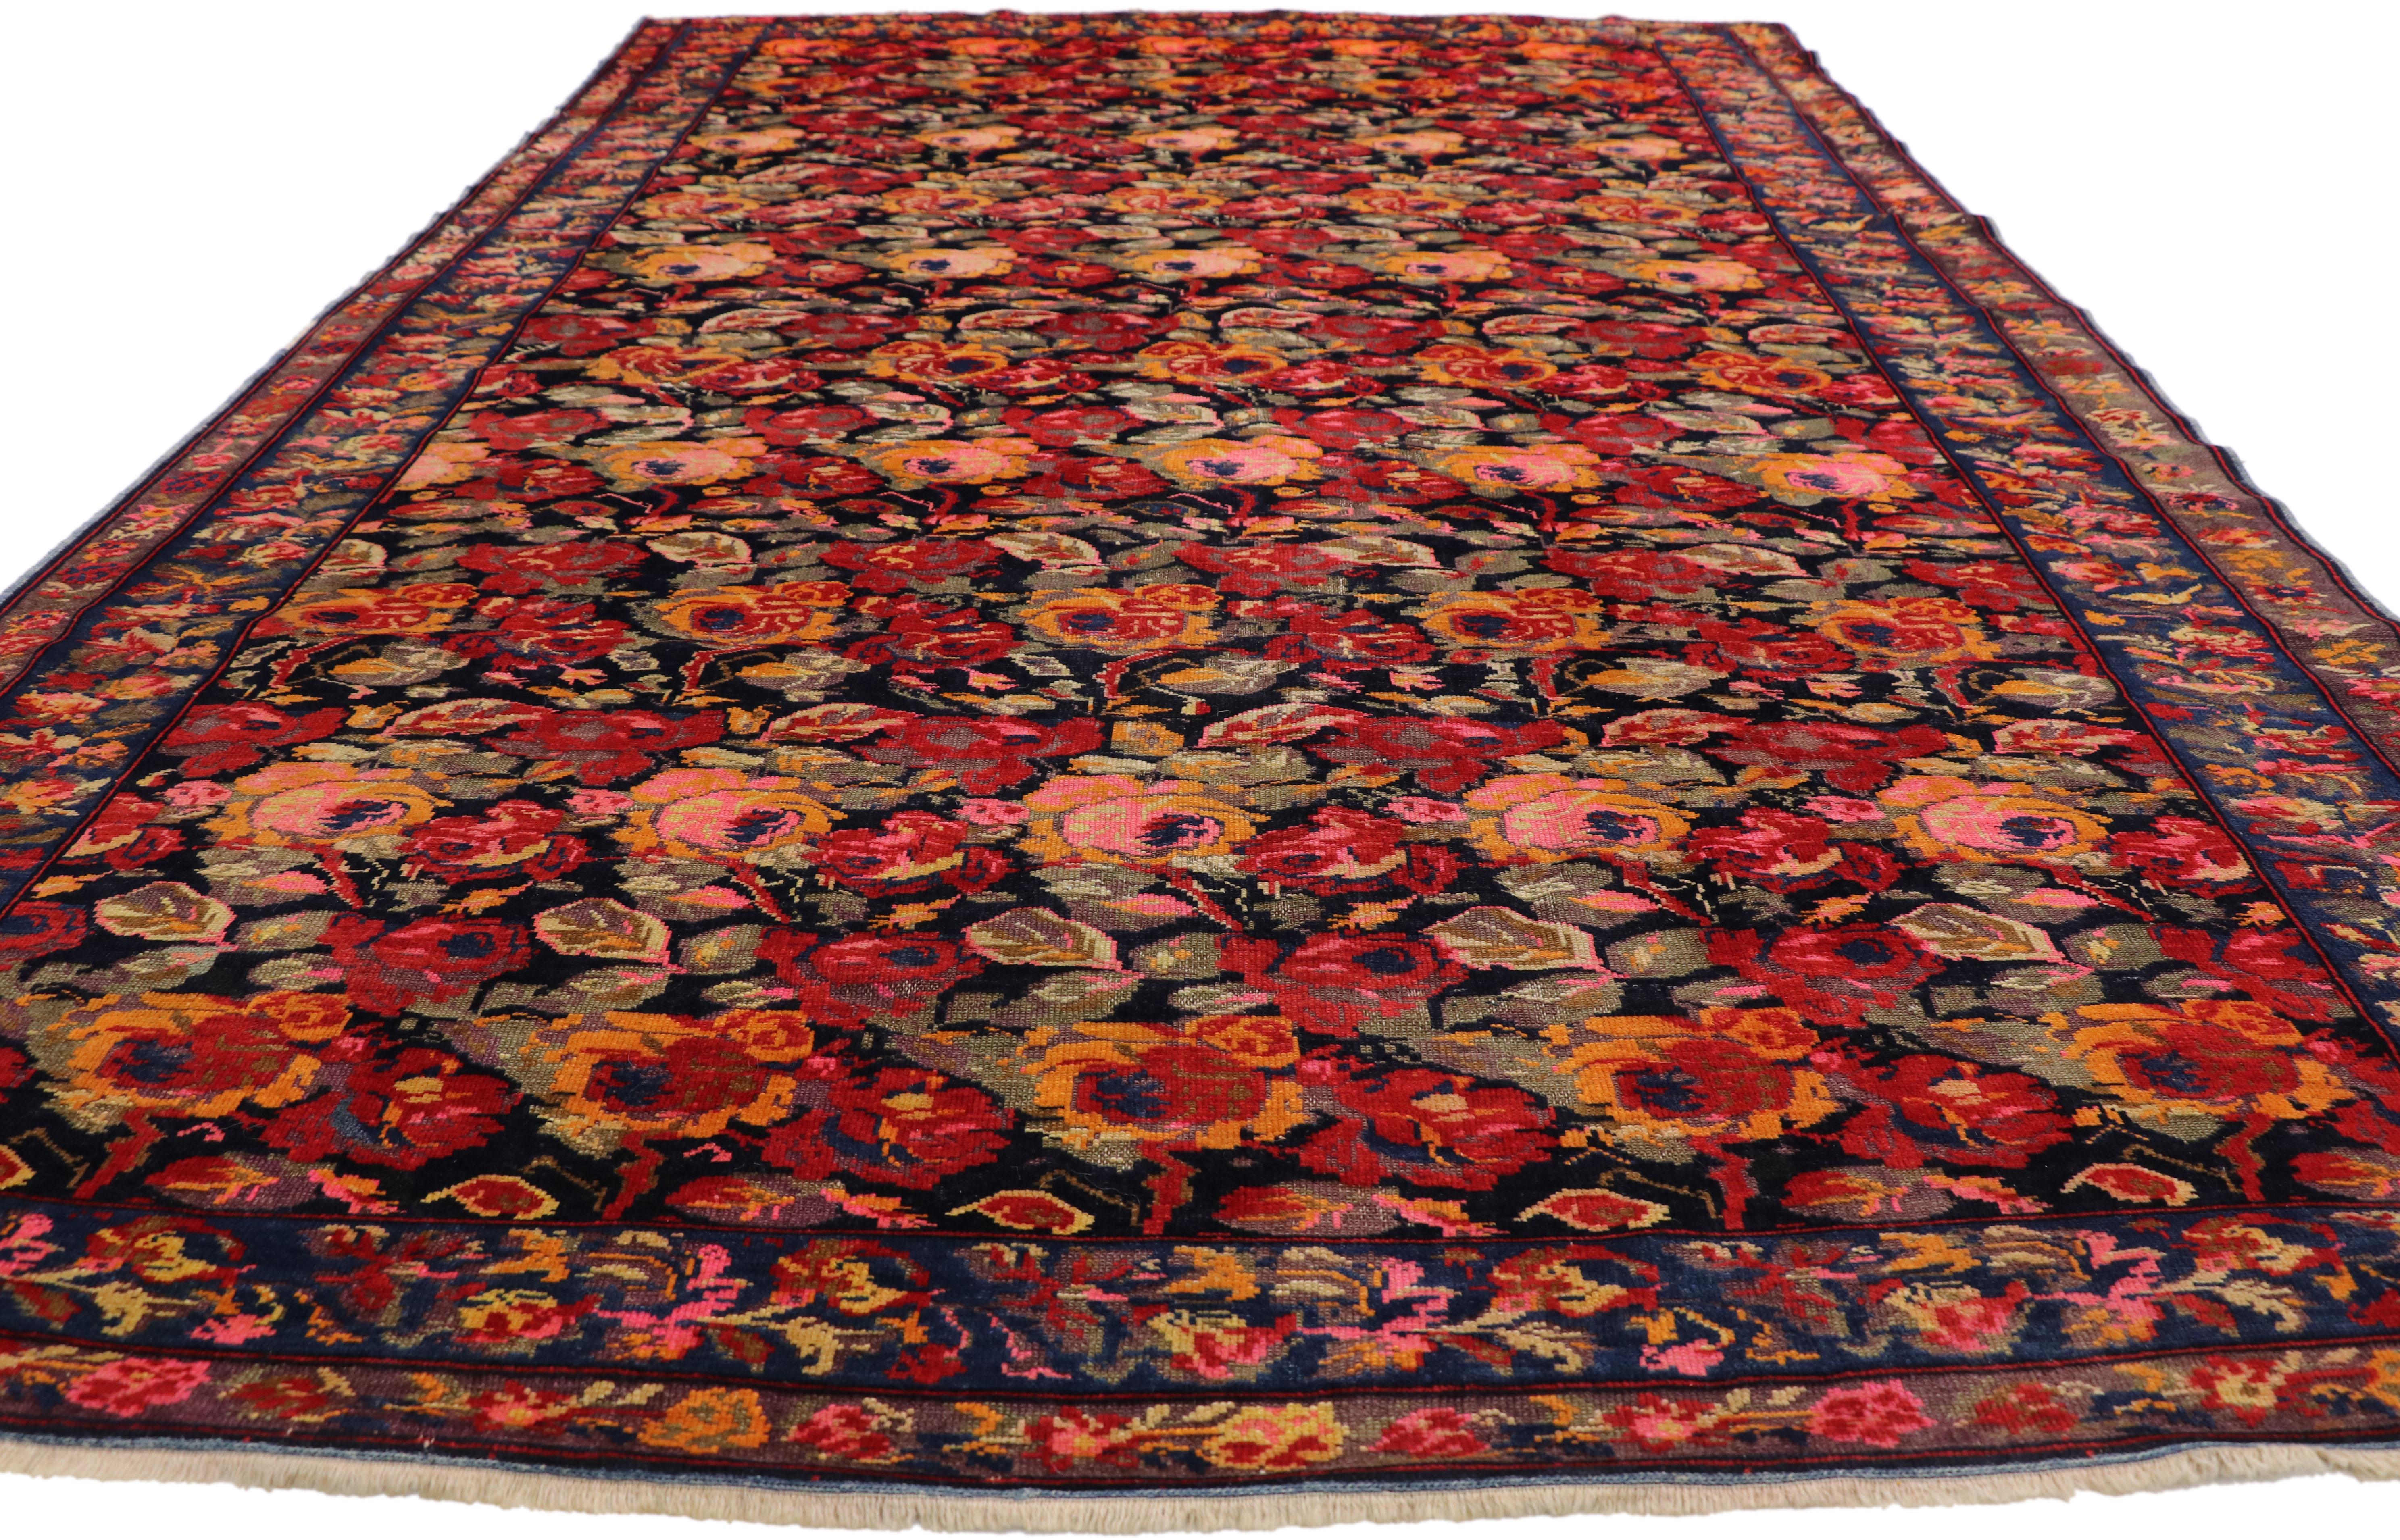 Hand-Knotted Vintage Caucasian Karabagh Rose Rug with English Cottage Tudor Style, Gol Farang For Sale